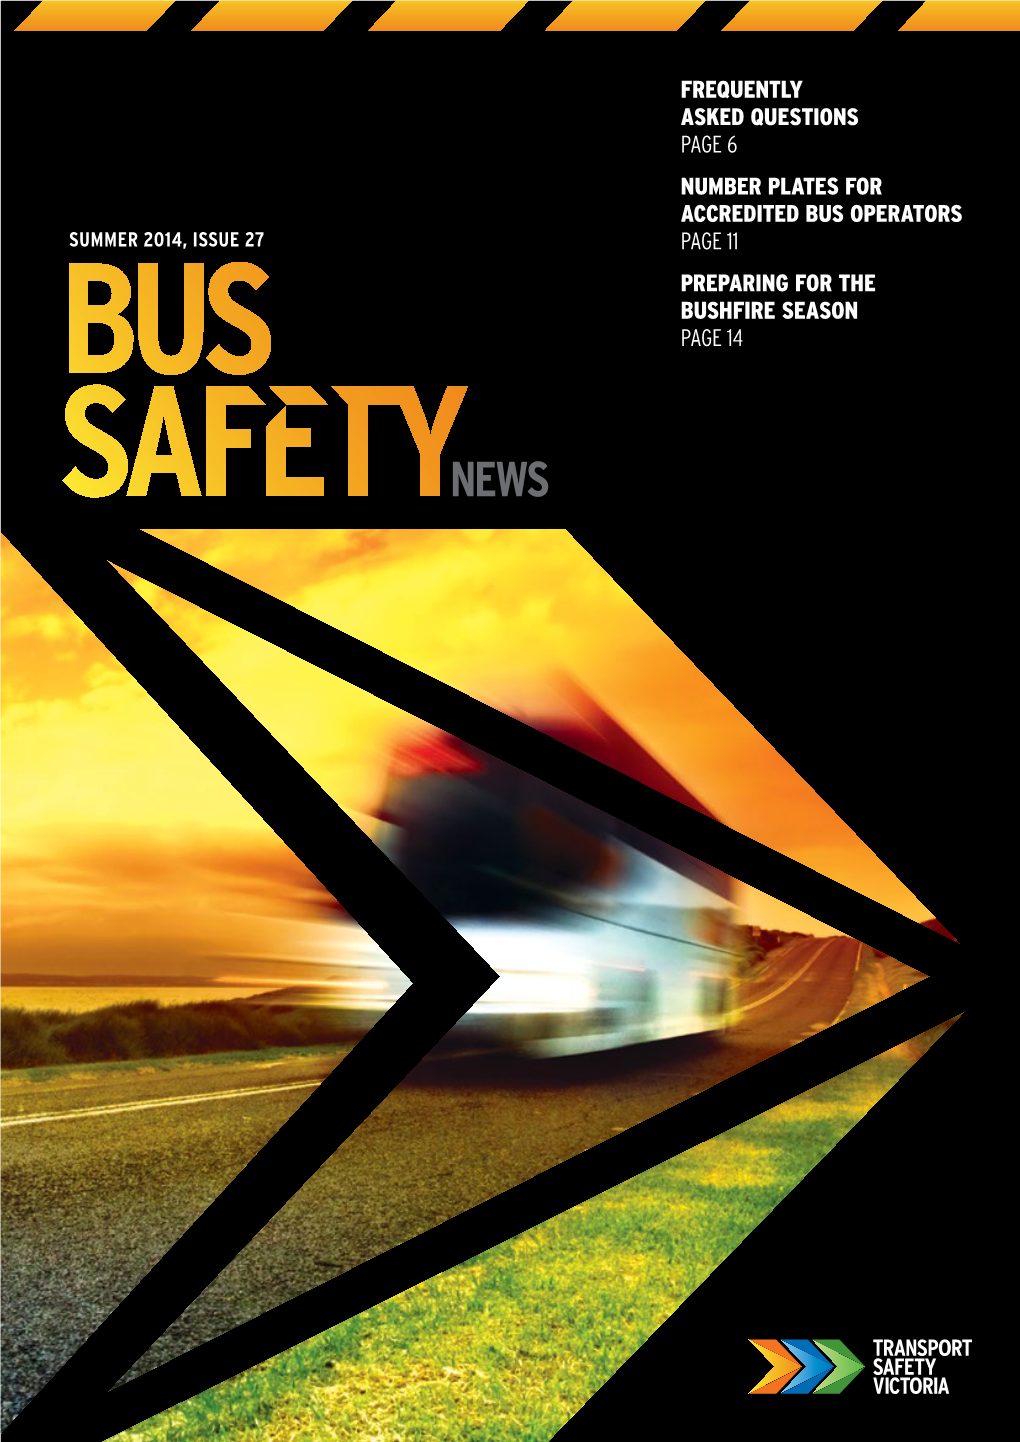 BUS SAFETY NEWS in THIS Summer EDITION